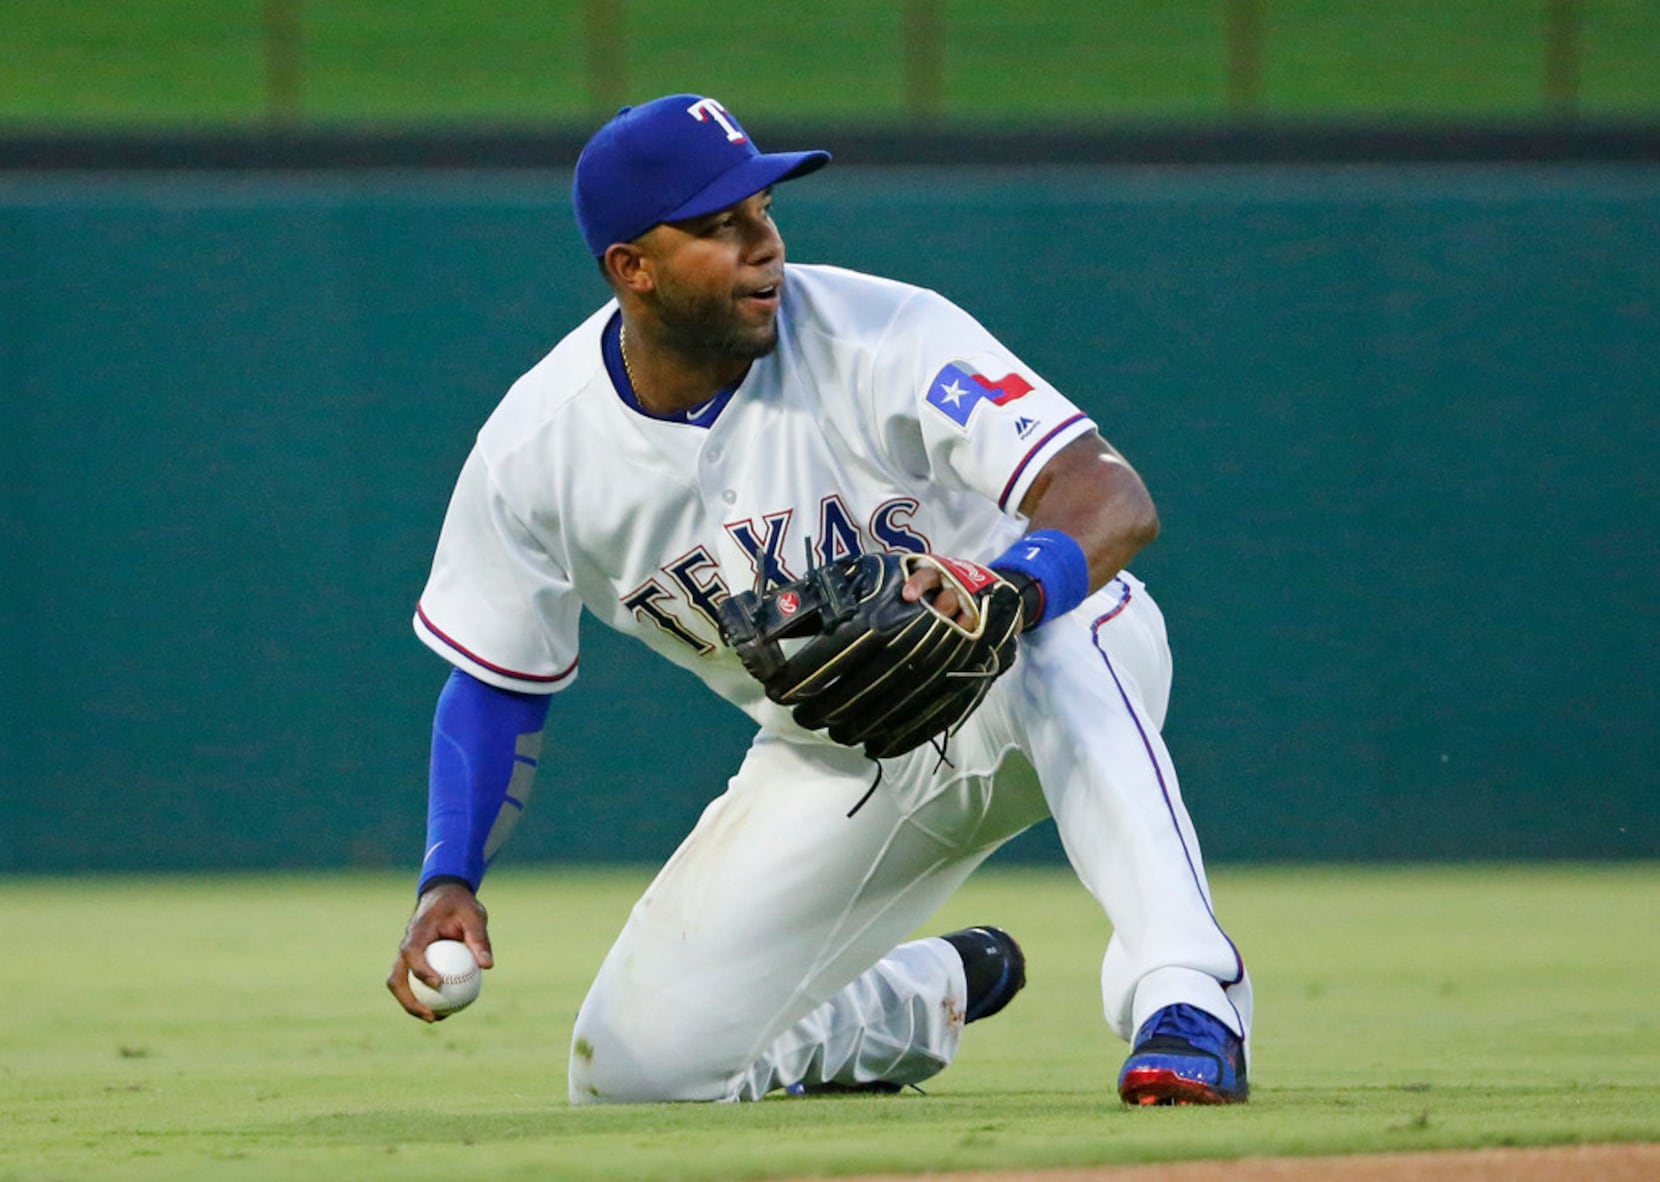 DSF Top 20 Current Athletes: #7 Rangers SS Elvis Andrus - Dallas